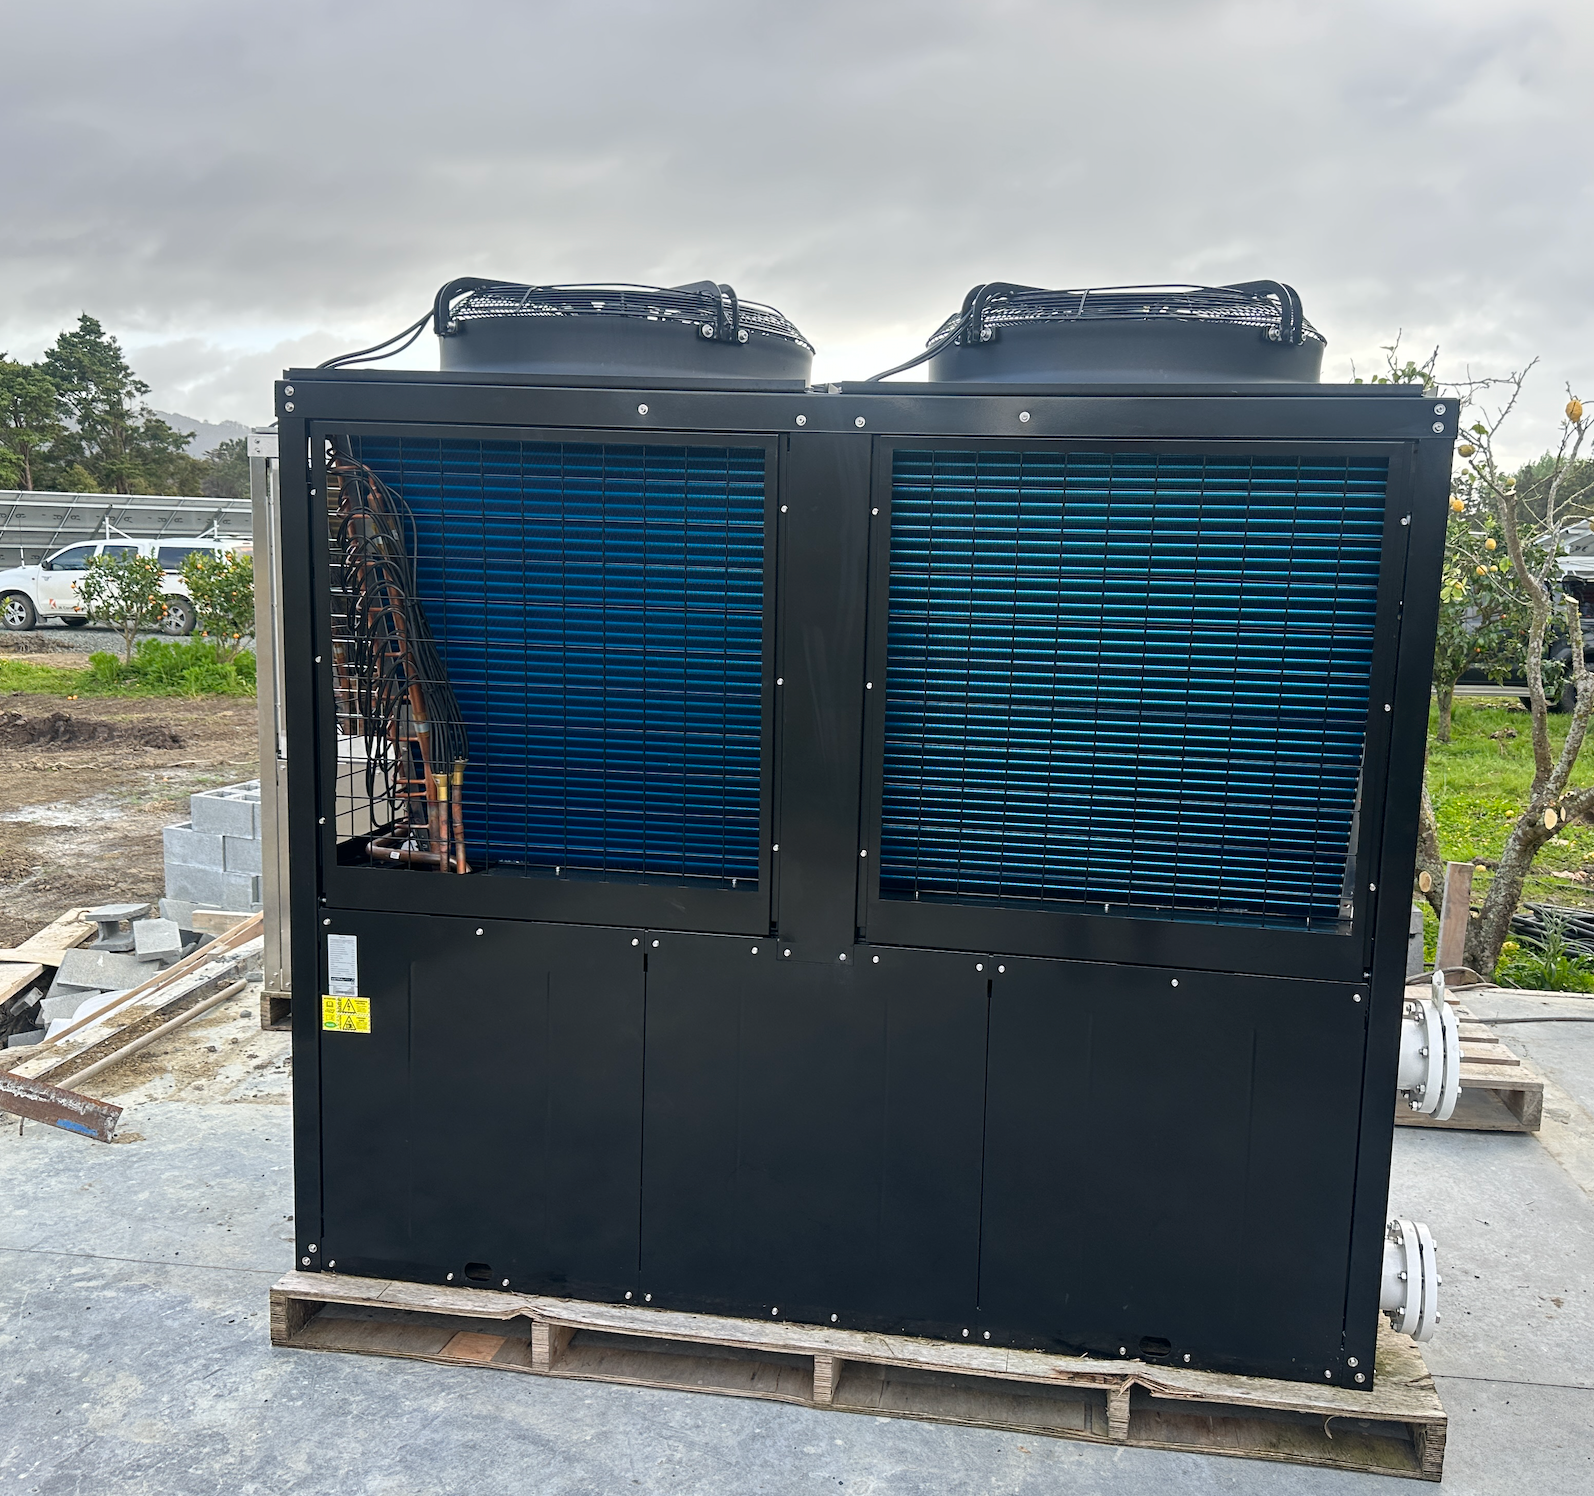 Astral Pool commercial 58KW Heat Pump